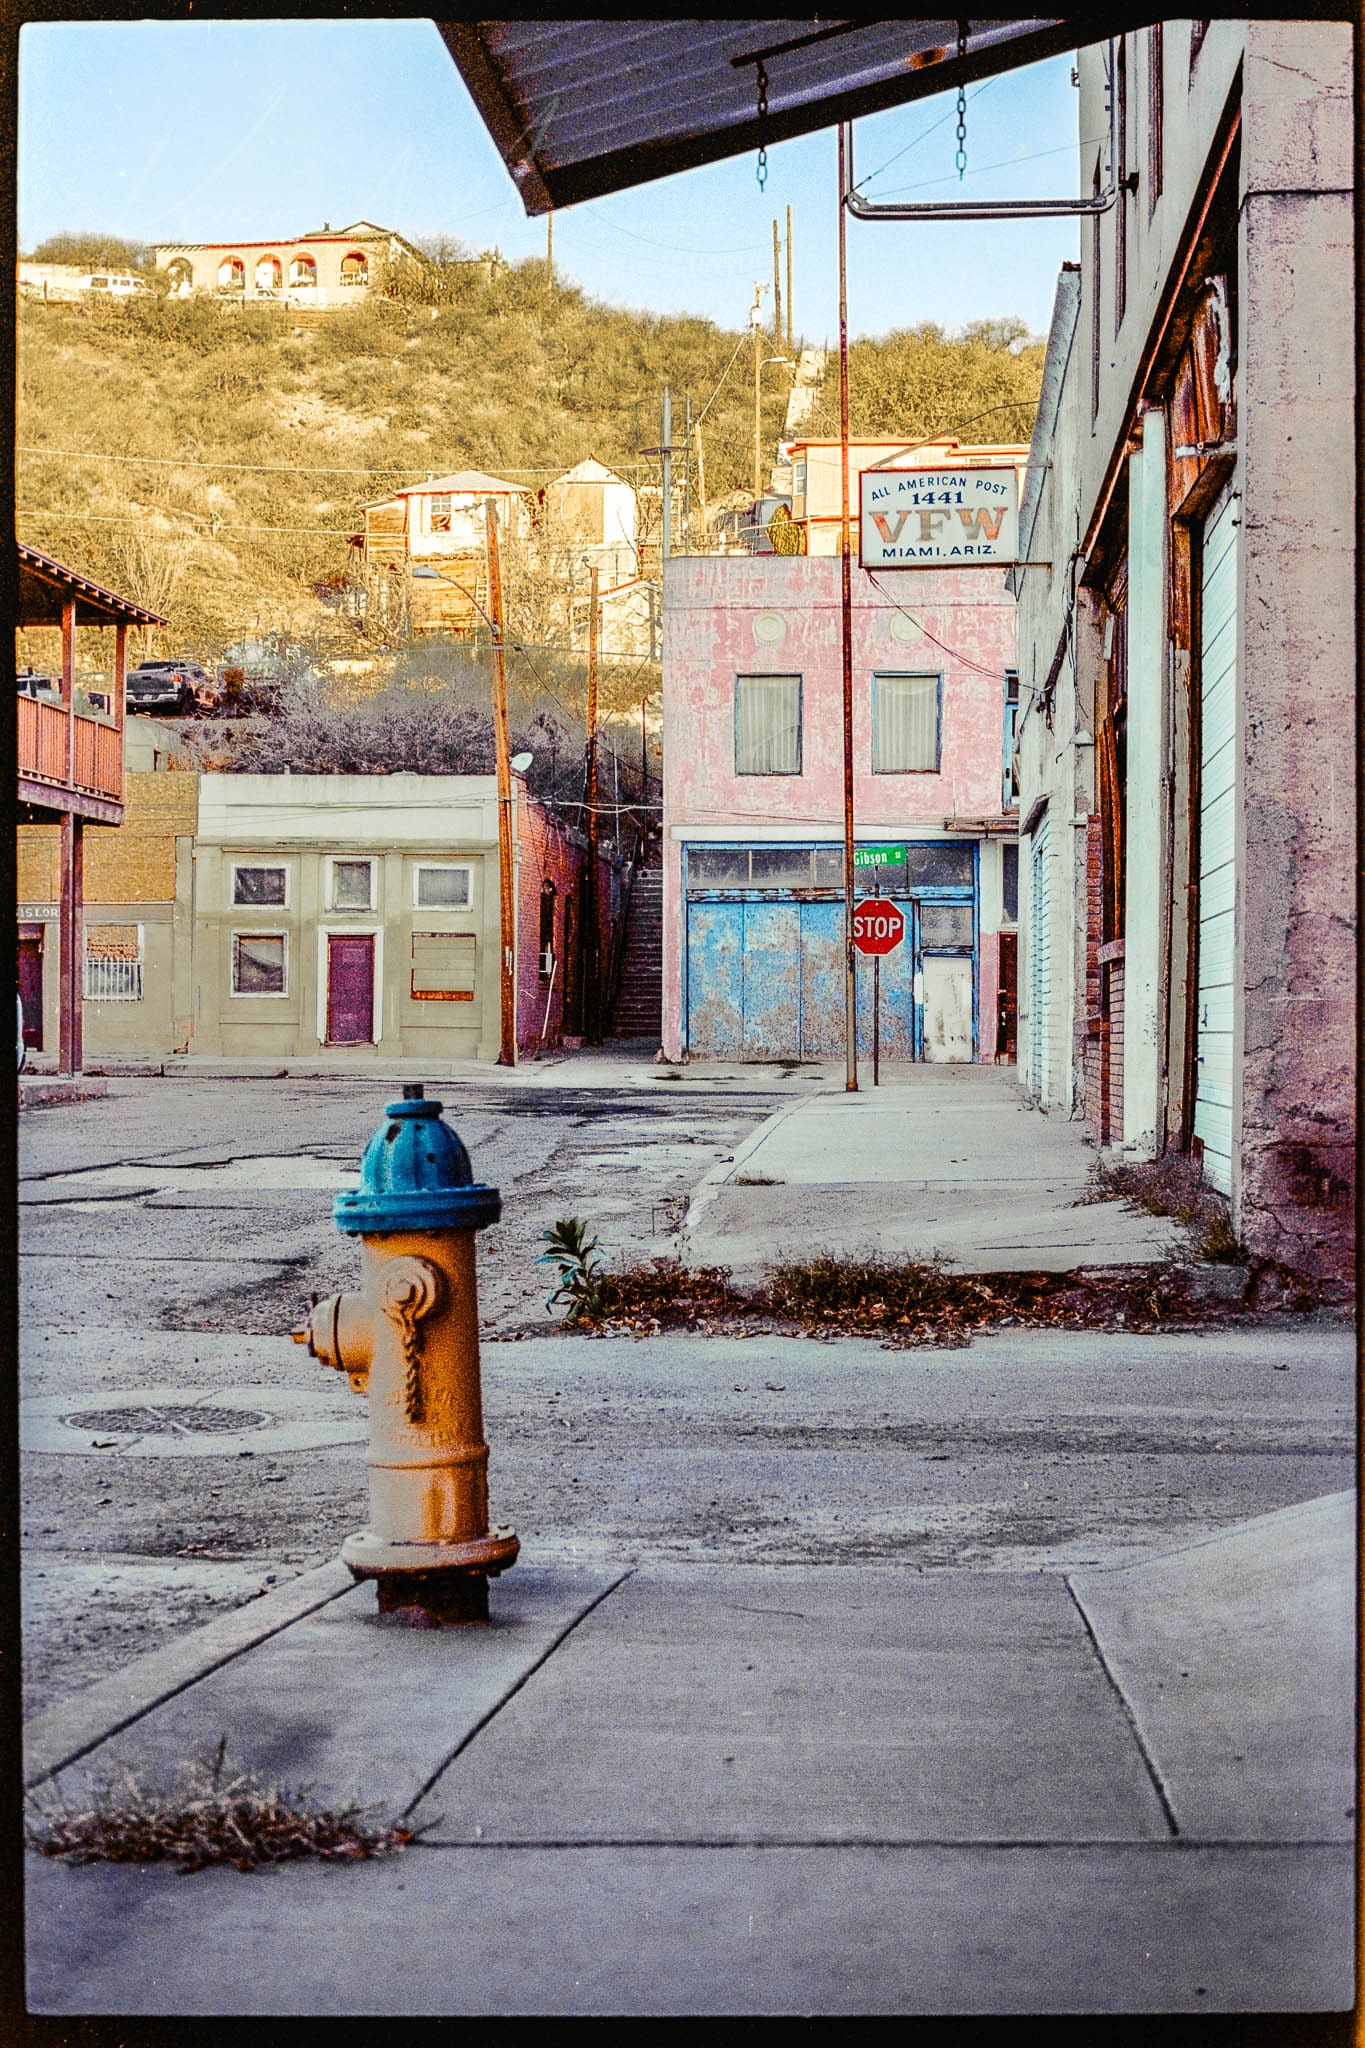 Vibrant fire hydrant standing out in a serene, weathered town nestled in hilly landscape.